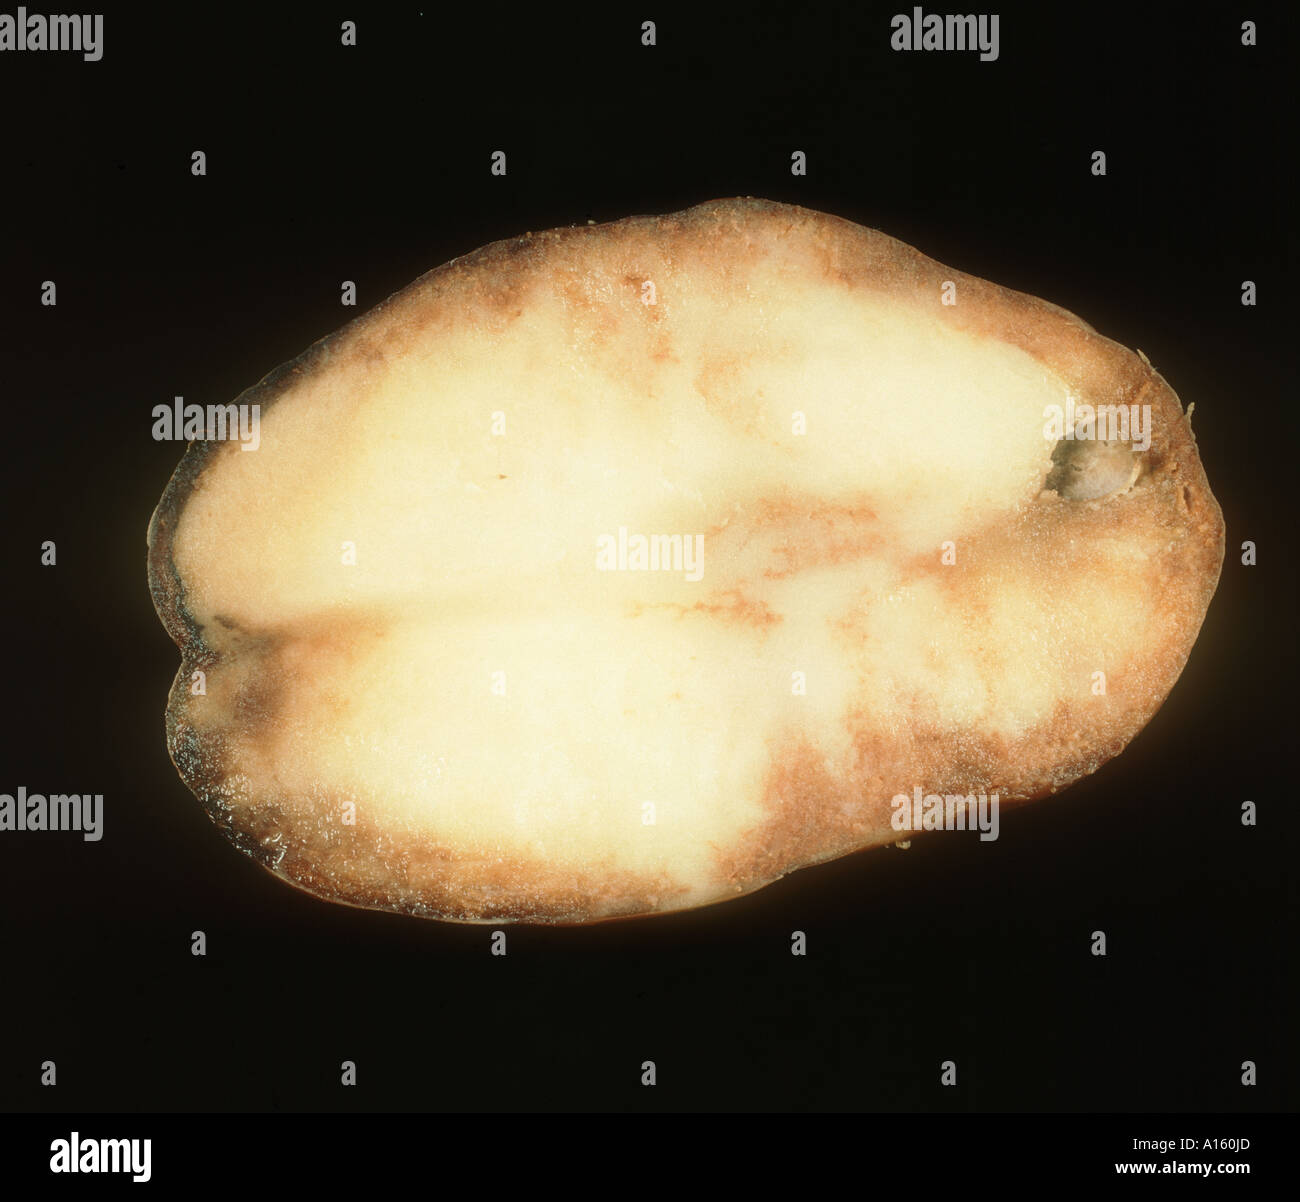 Late blight Phytophthora infestans damage to potato flesh shown in cross section Stock Photo